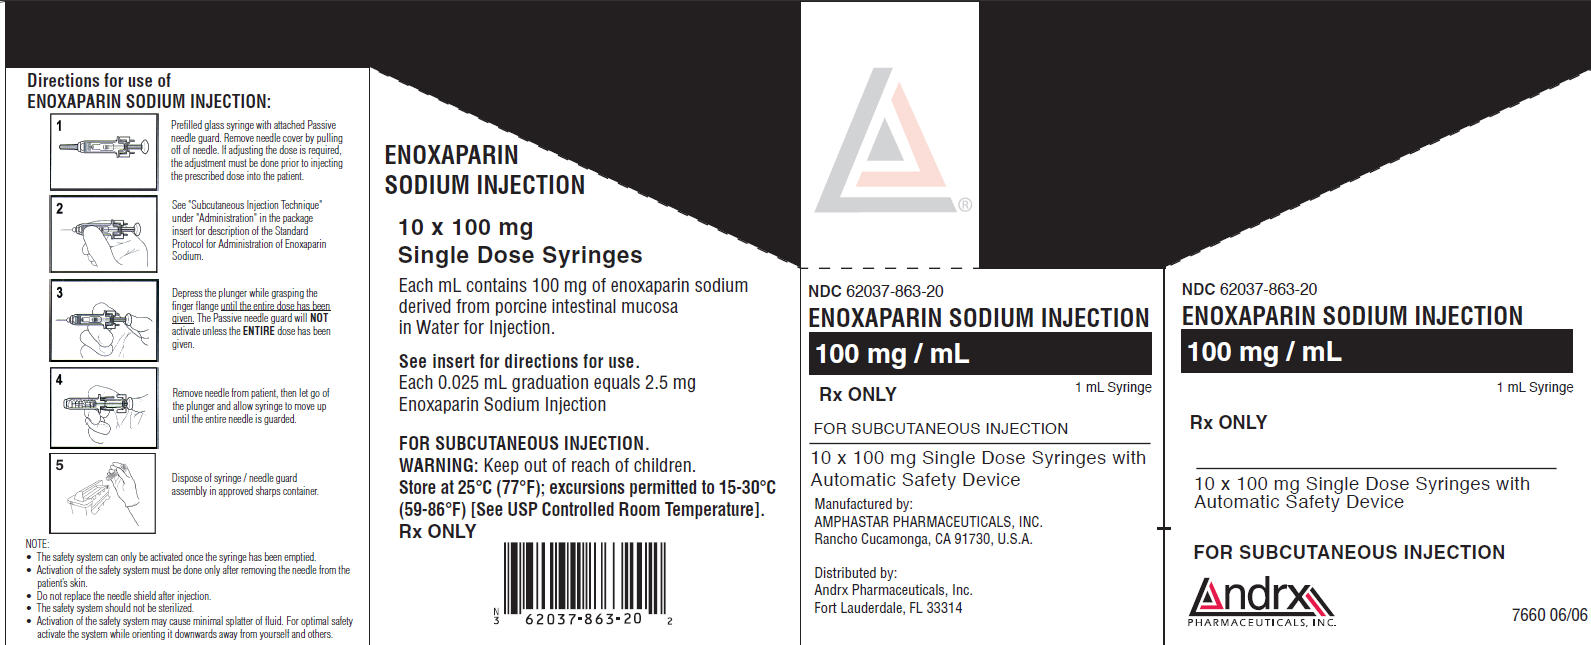 NDC 62037-863-20 ENOXAPARIN SODIUM INJECTION 100 mg/ mL Rx ONLY 1 mL Syringe FOR SUBCUTANEOUS INJECTION 10 x 100 mg Single Dose Syringes with Automatic Safety Device